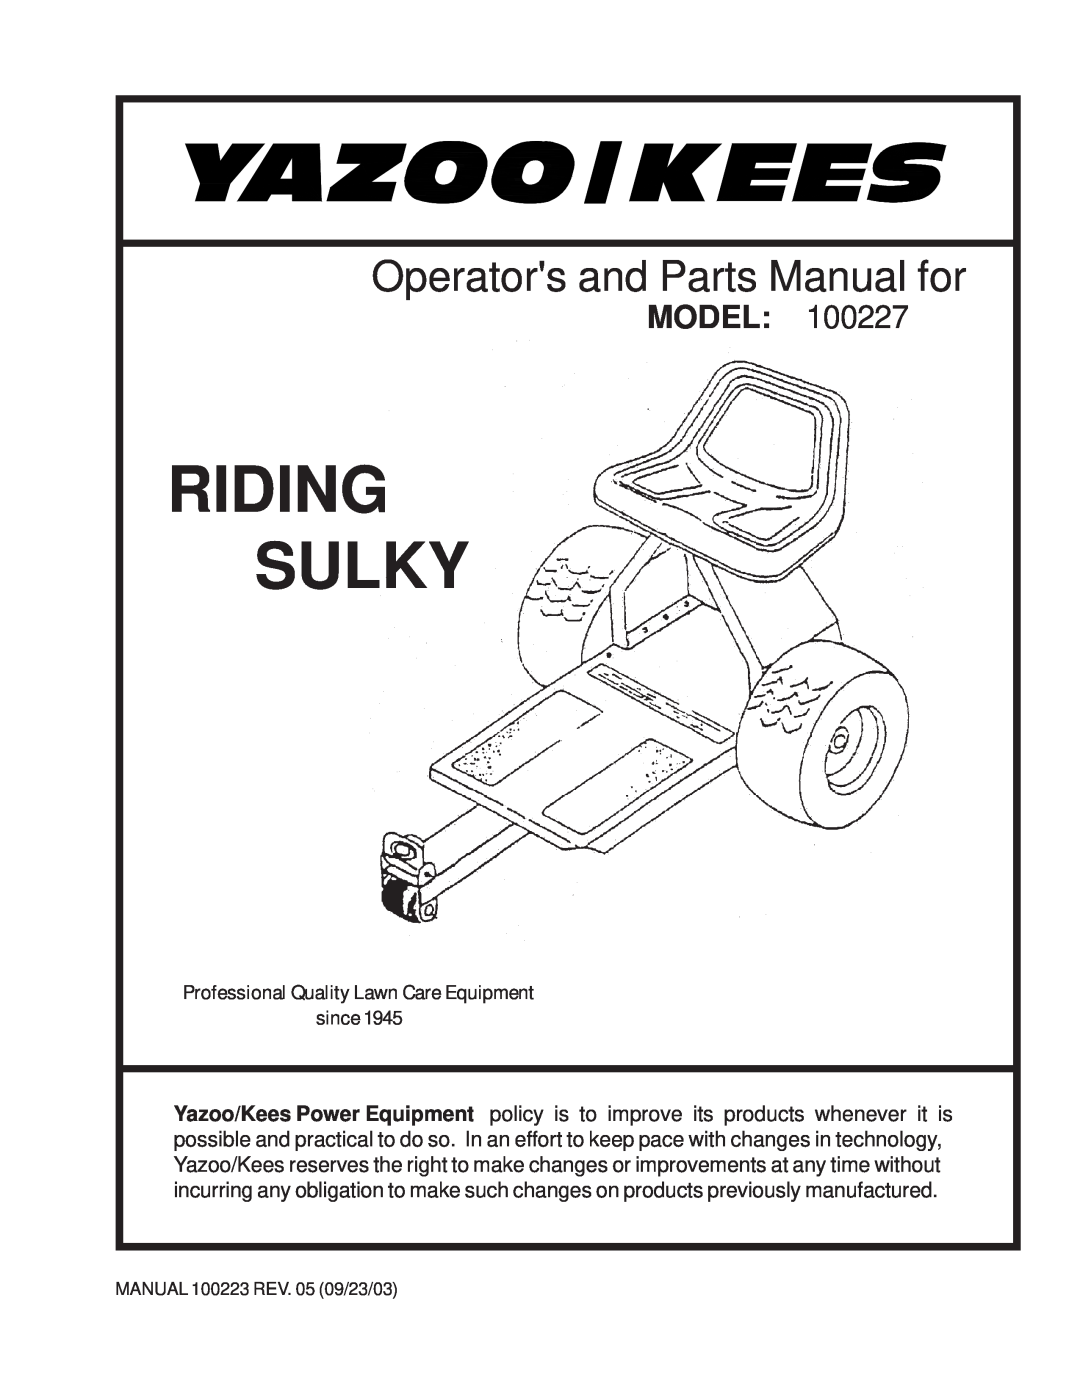 Yazoo/Kees 100227 manual Professional Quality Lawn Care Equipment since, Riding Sulky, Operators and Parts Manual for 